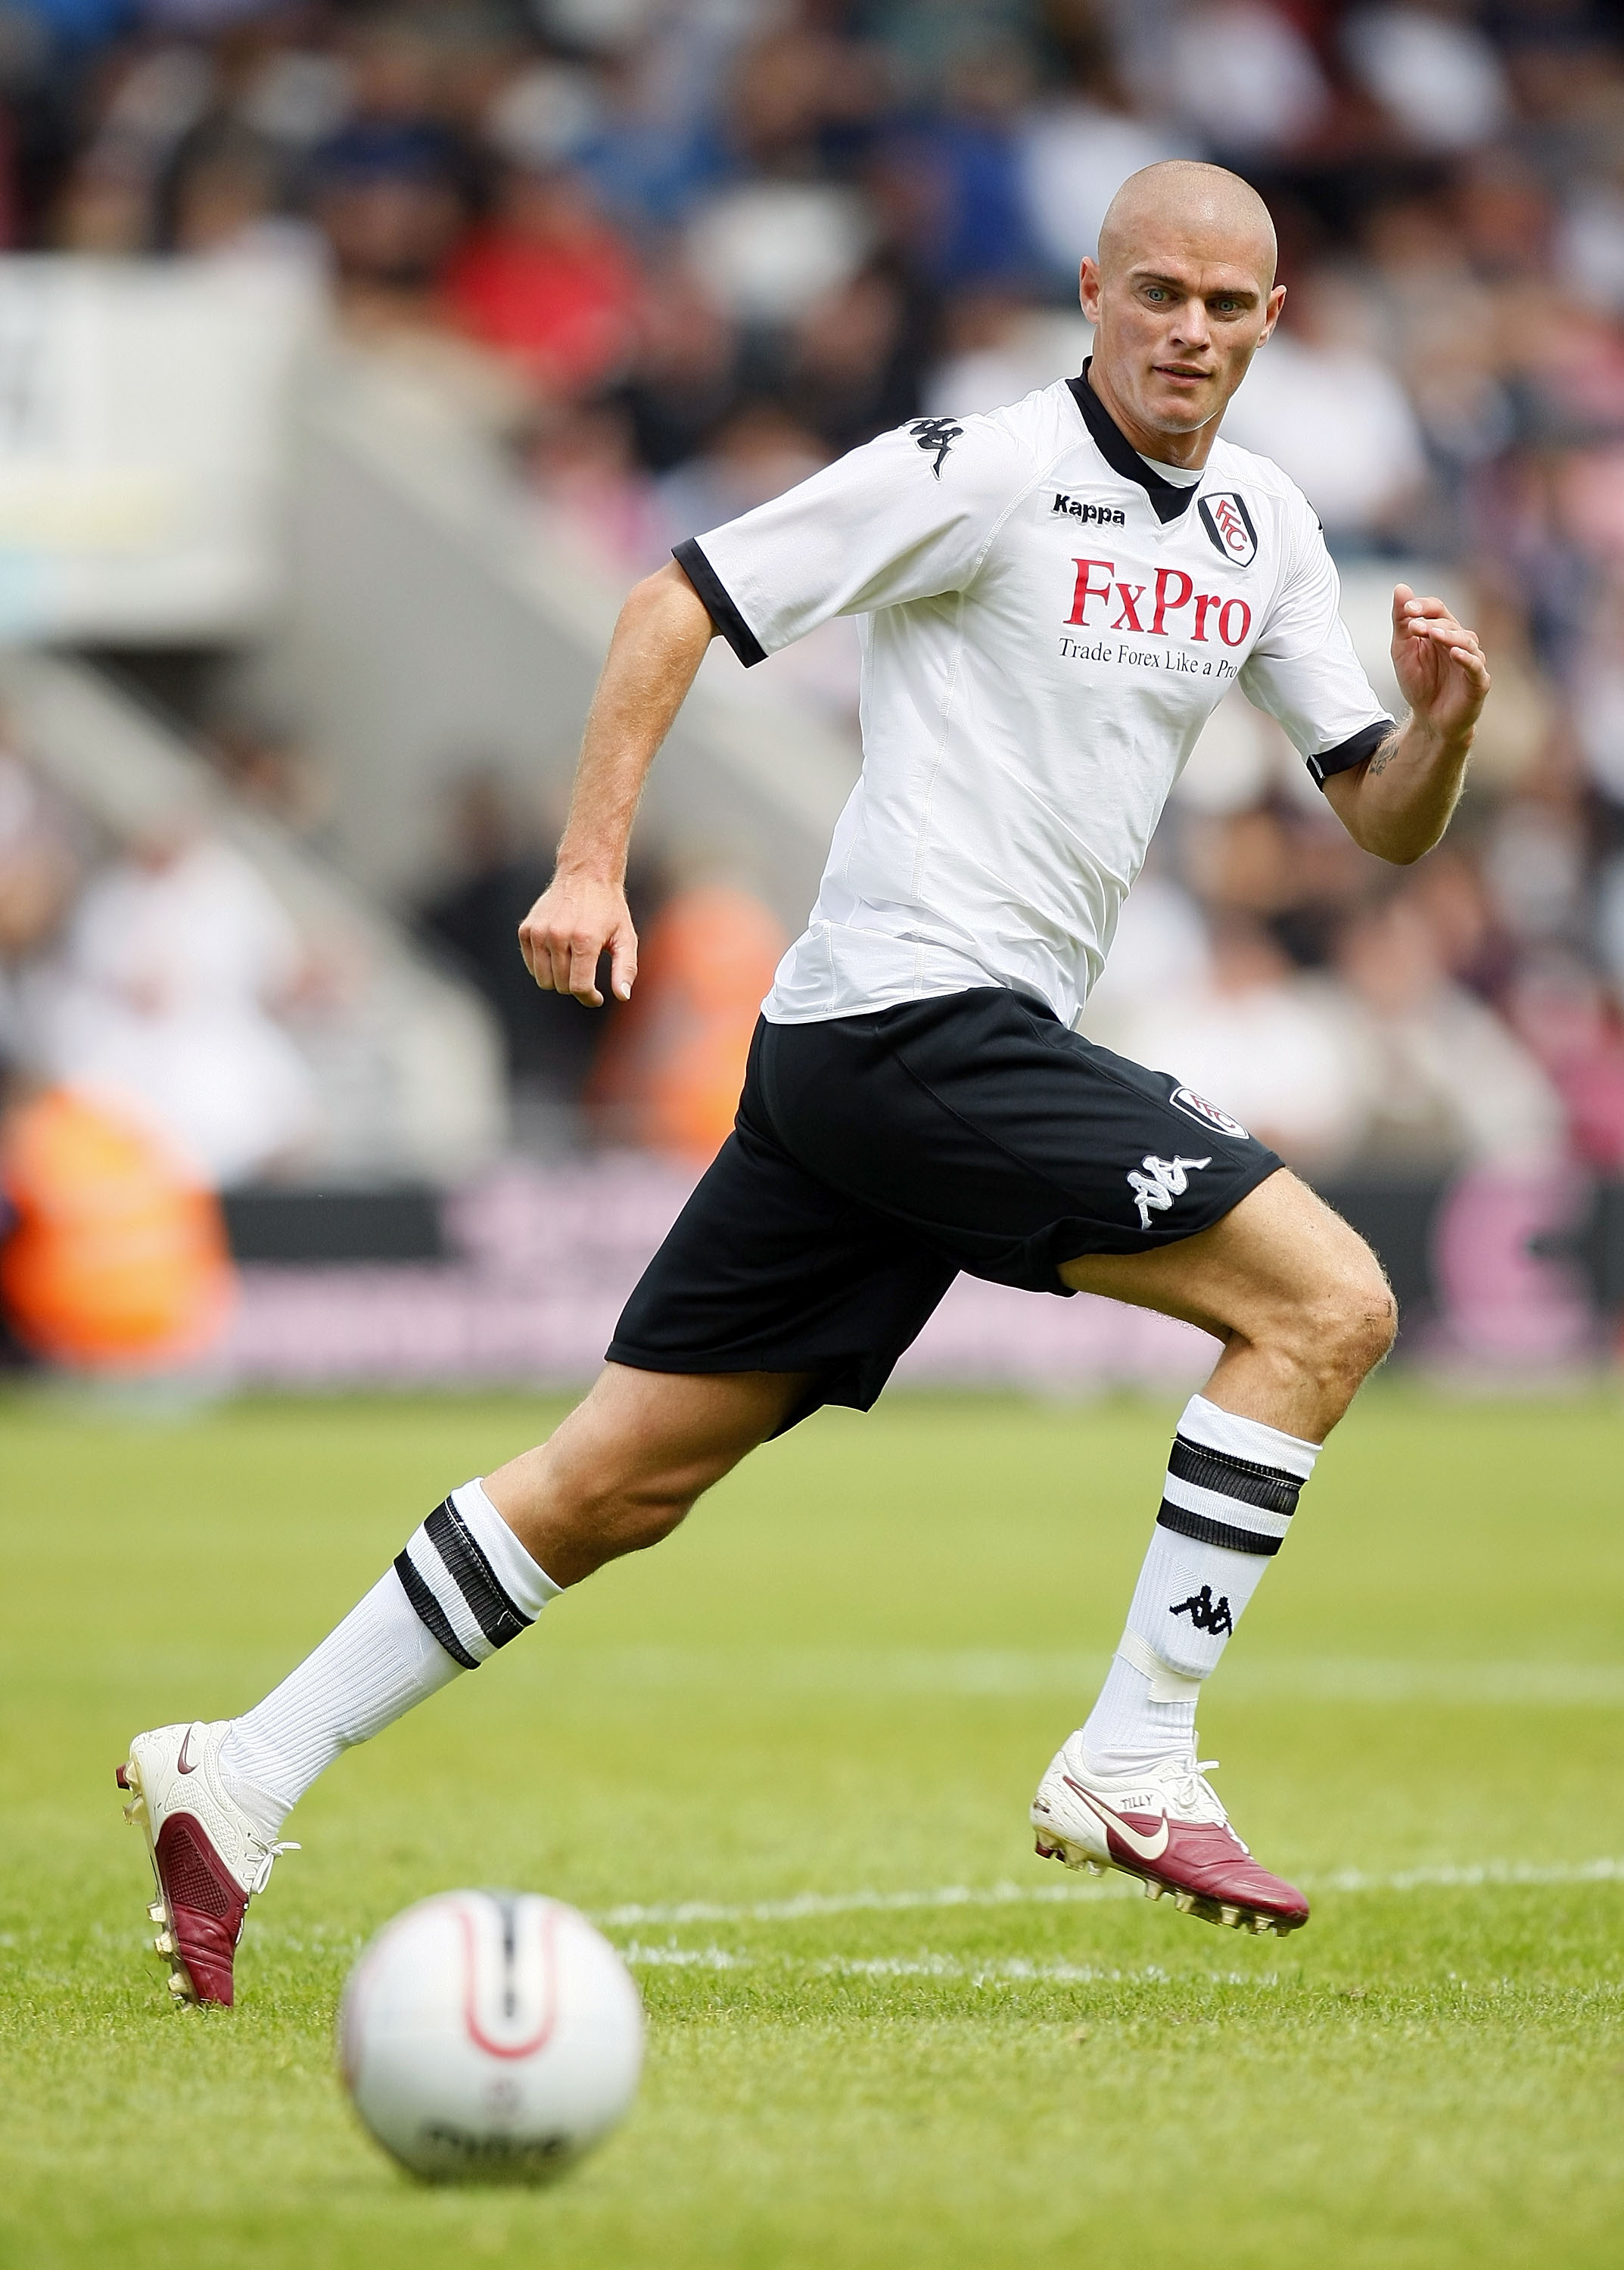 BOURNEMOUTH, ENGLAND - JULY 17: Paul Konchesky of Fulham in action during the pre season friendly match between AFC Bournemouth and Fulham at the Fitness First Stadium on July 17, 2010 in Bournemouth, England. (Photo by Tom Dulat/Getty Images)